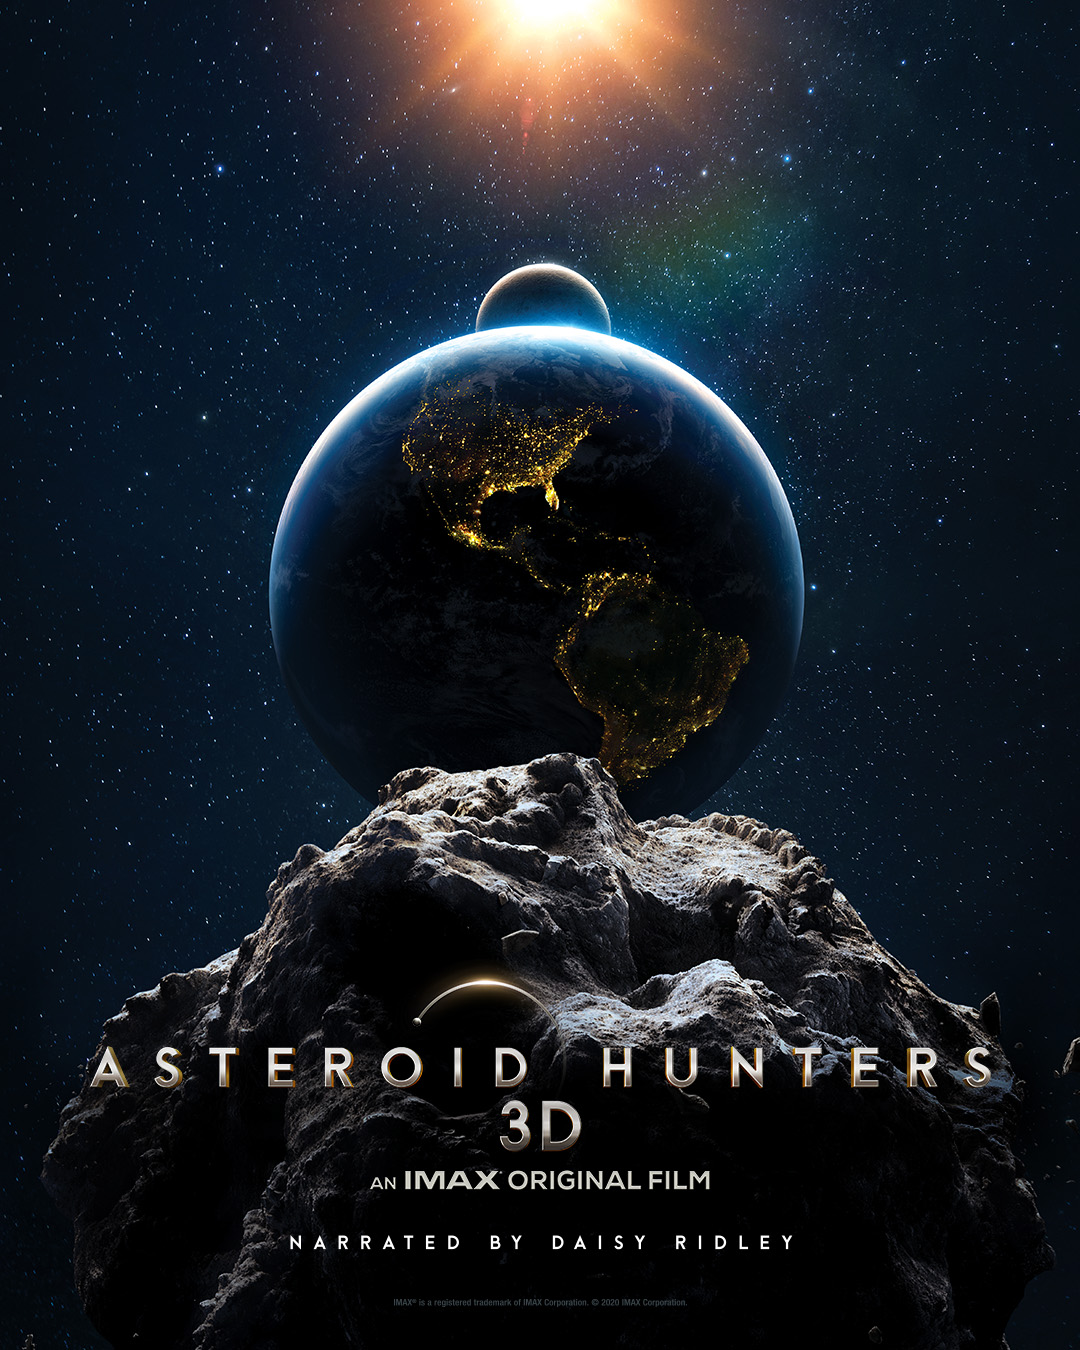 Vertical Key Art for Asteroid Hunters 3D